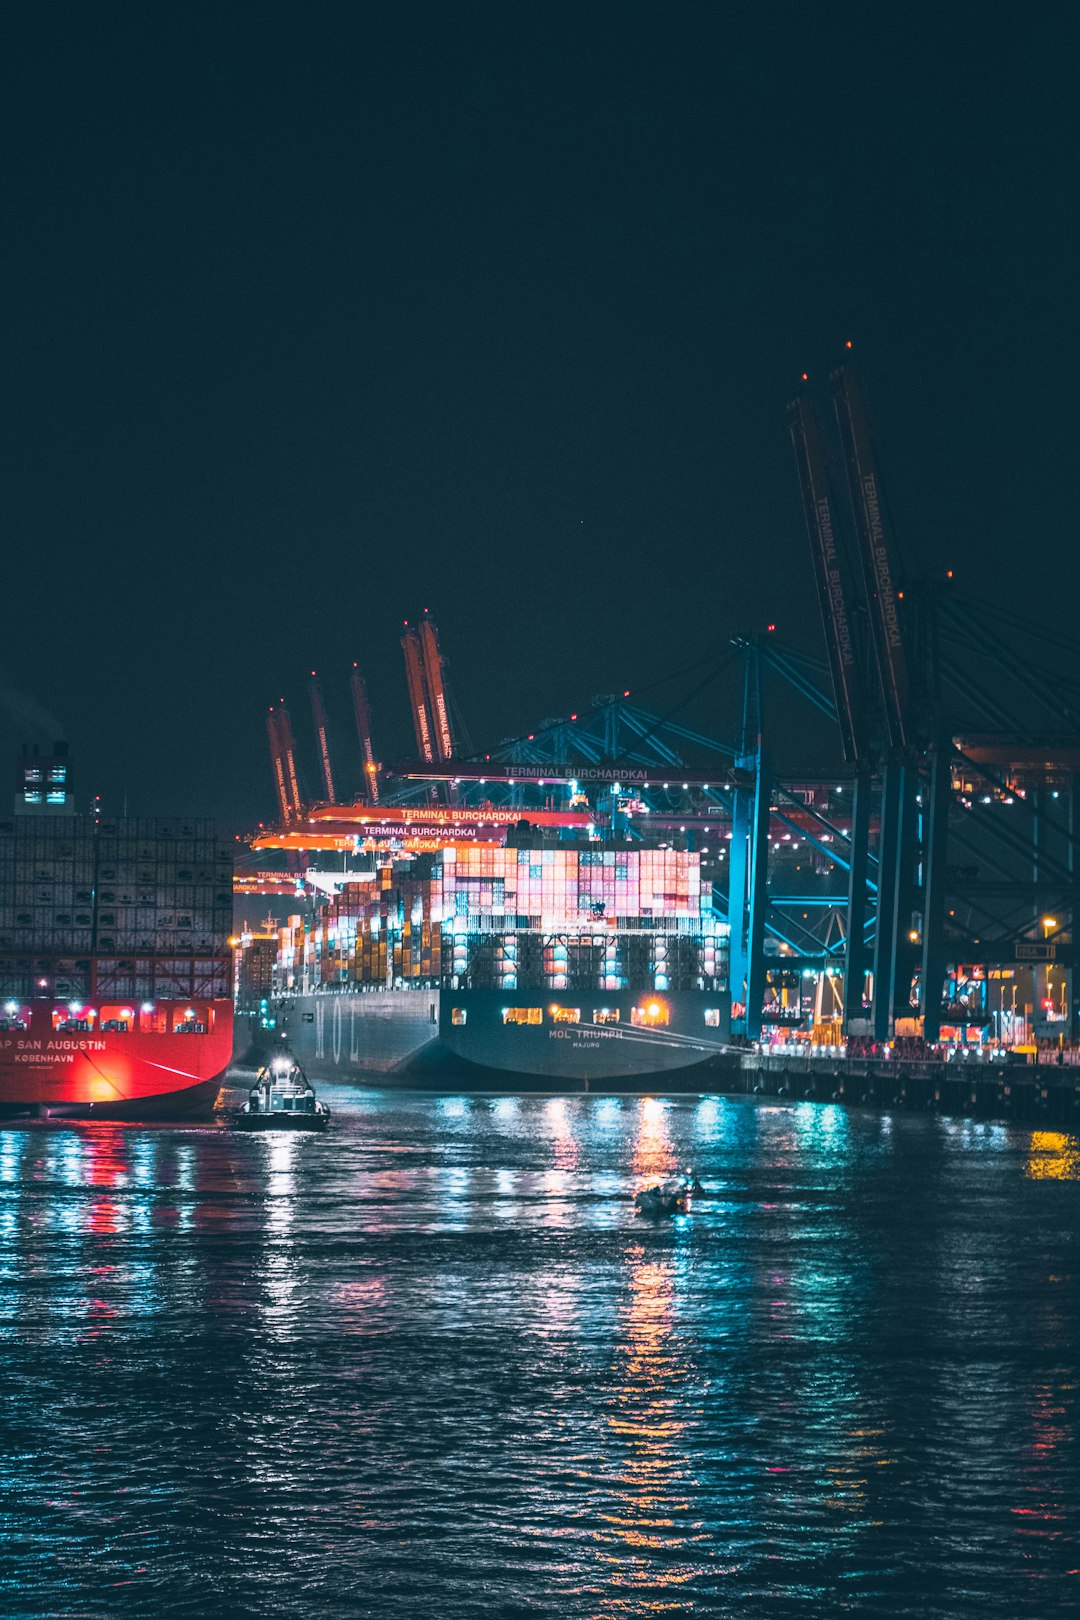 red and white cargo ship on dock during night time